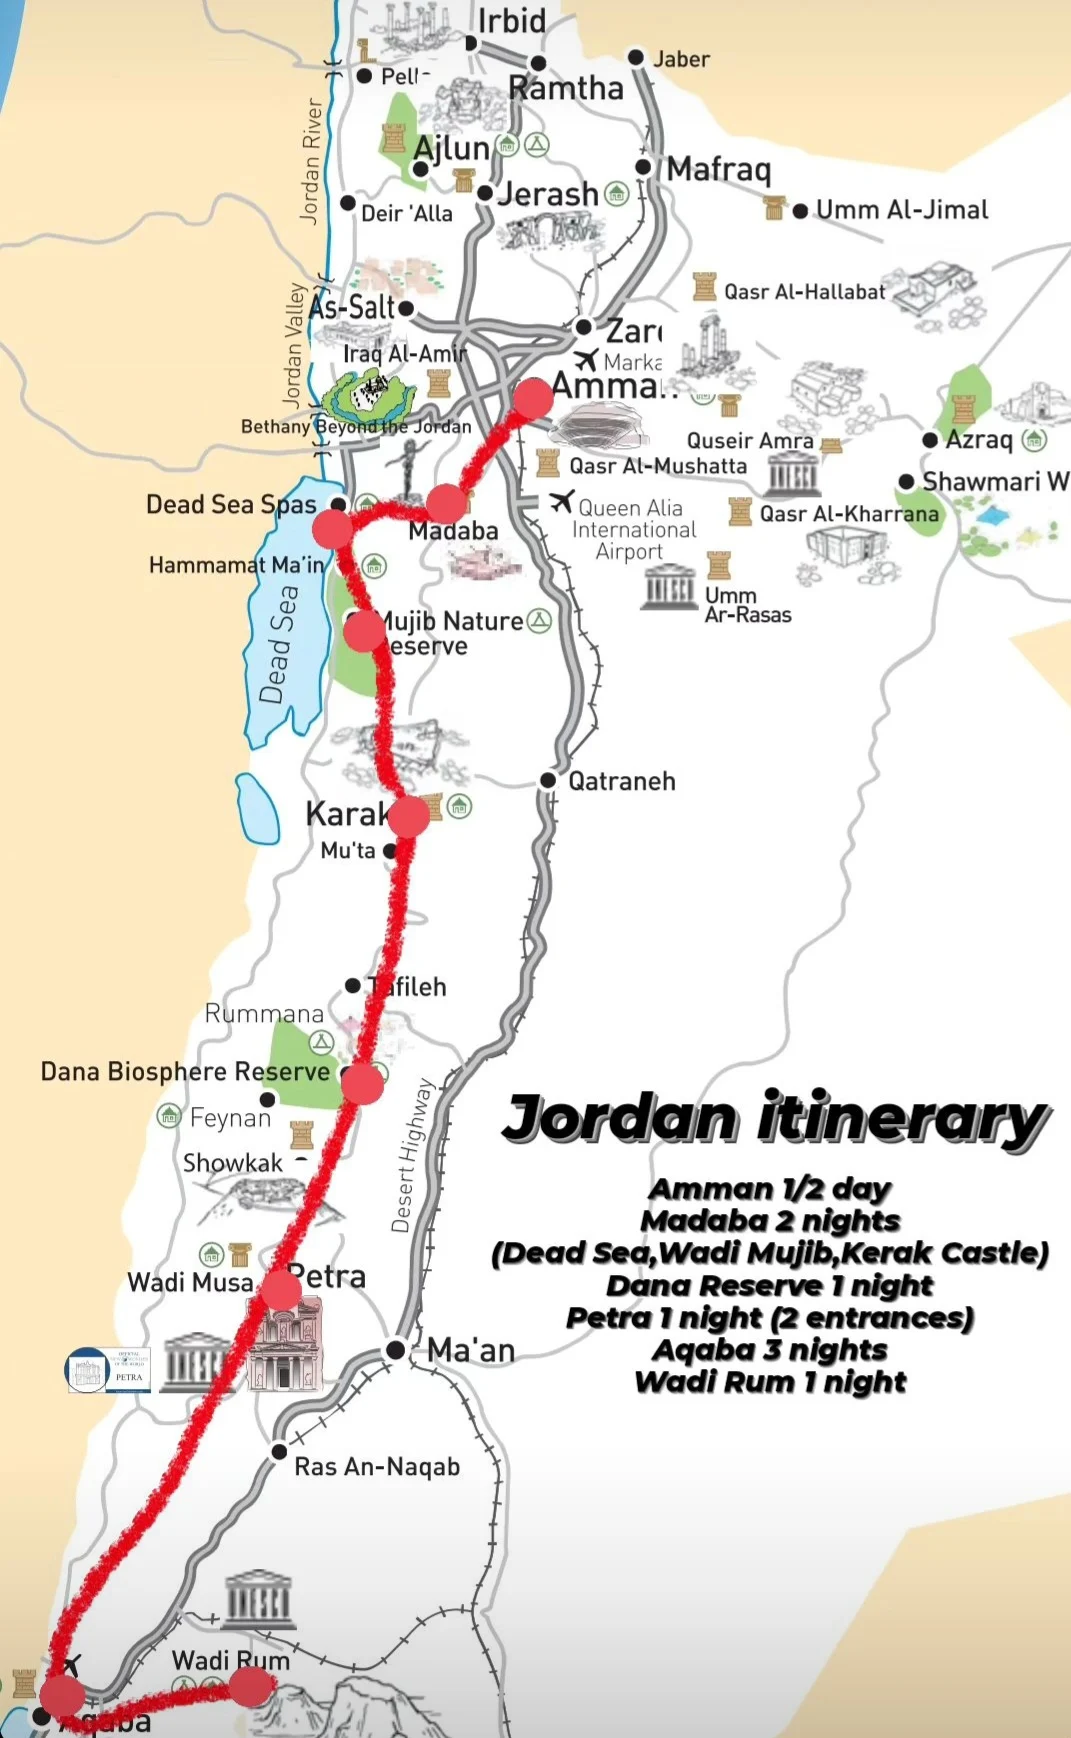 Our 10-day Jordan itinerary